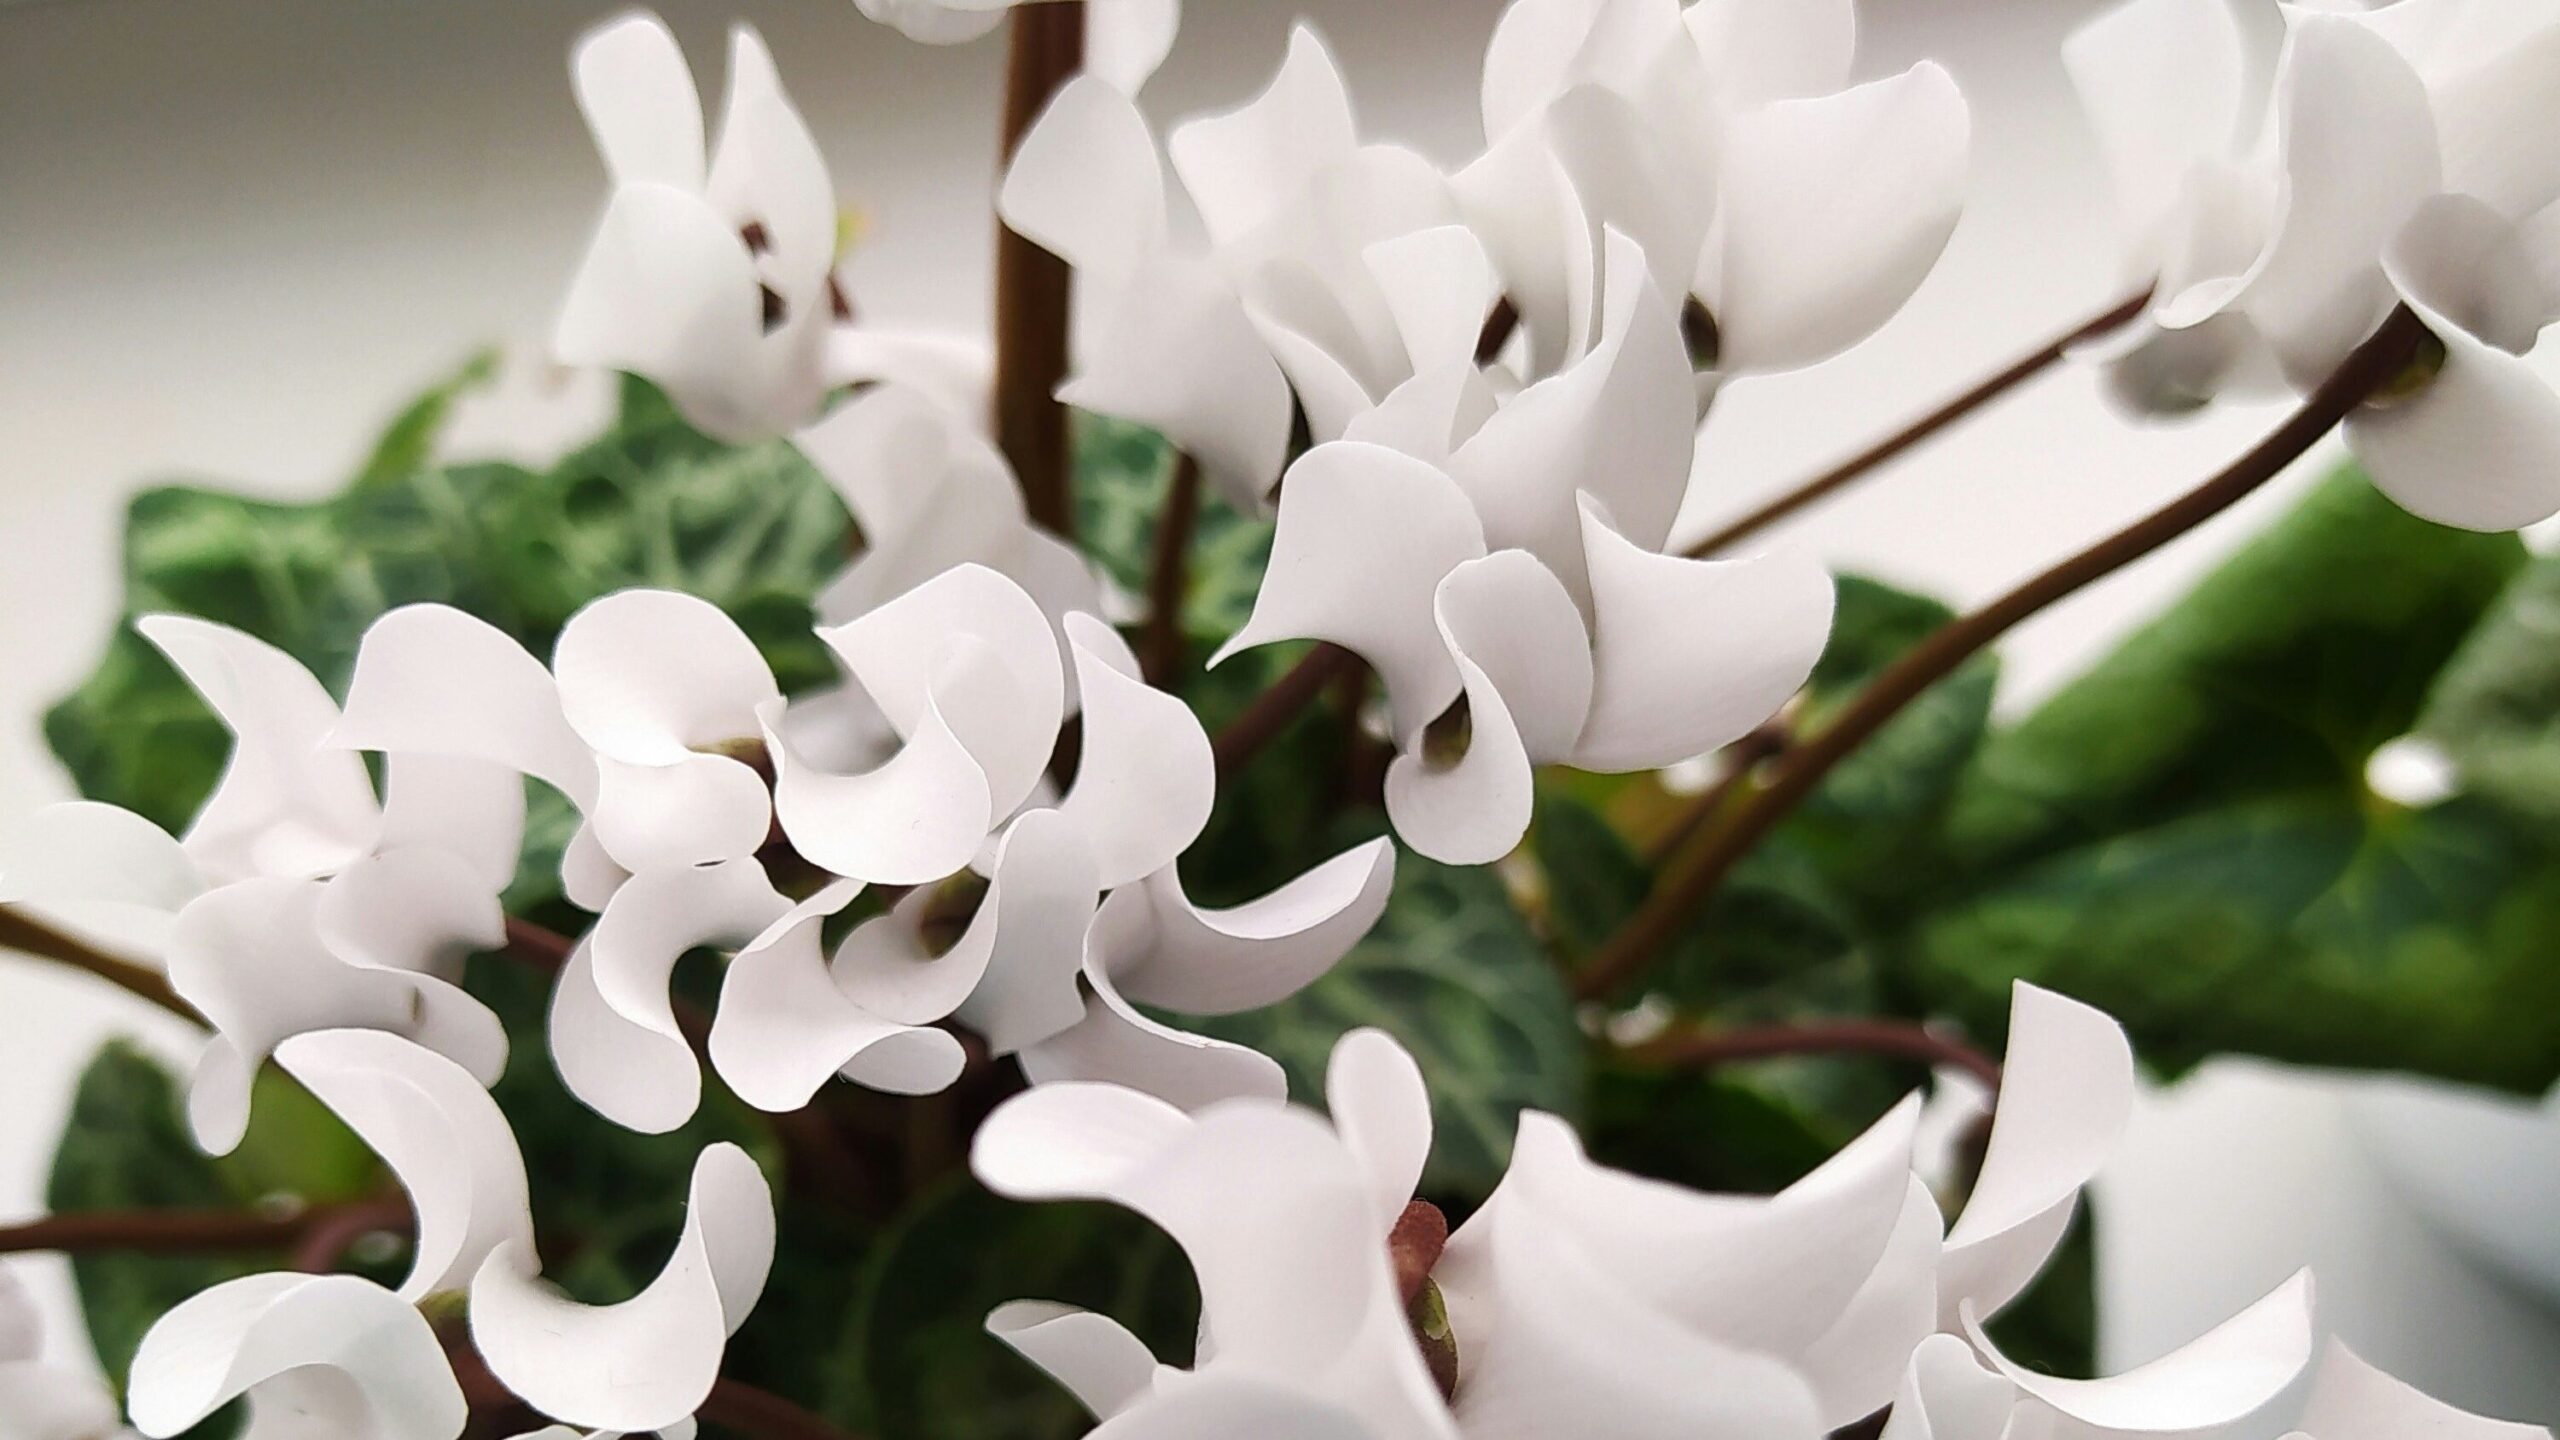 cyclamen white bunch of flowers that represent sadness